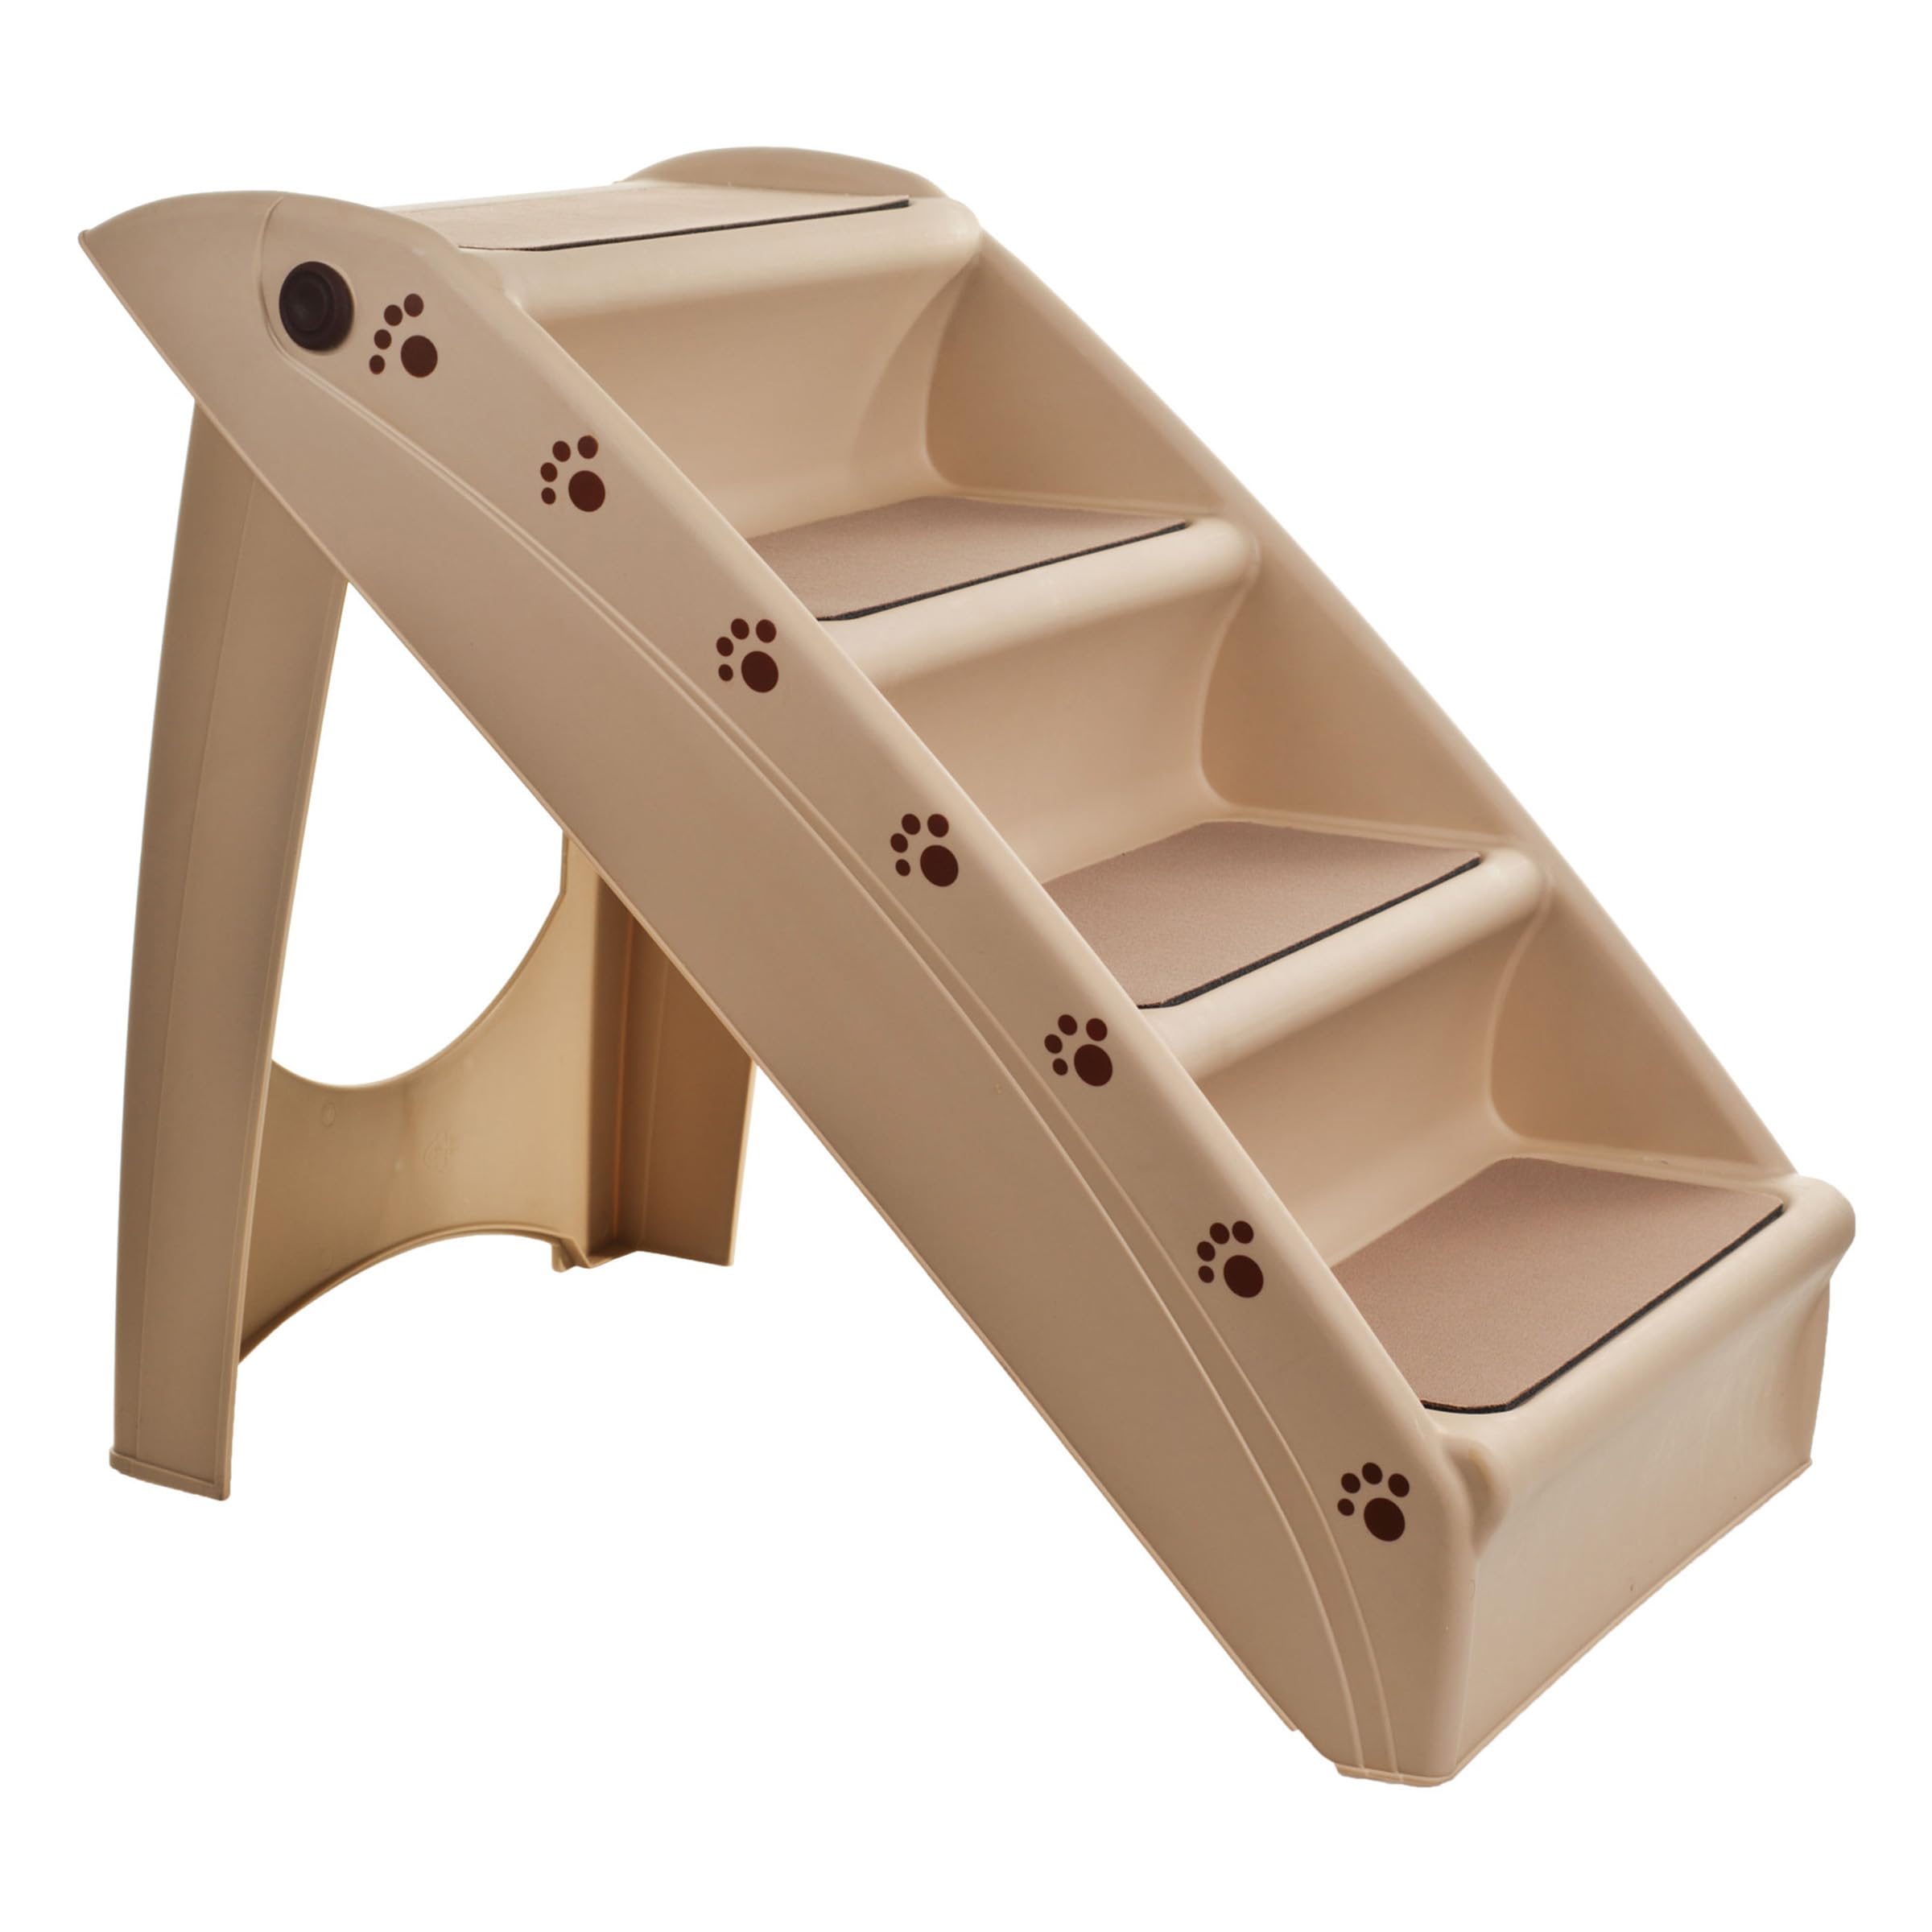 4-Step Petmaker Foldable Dog Stairs $26 + Free Shipping w/ Prime or on $35+